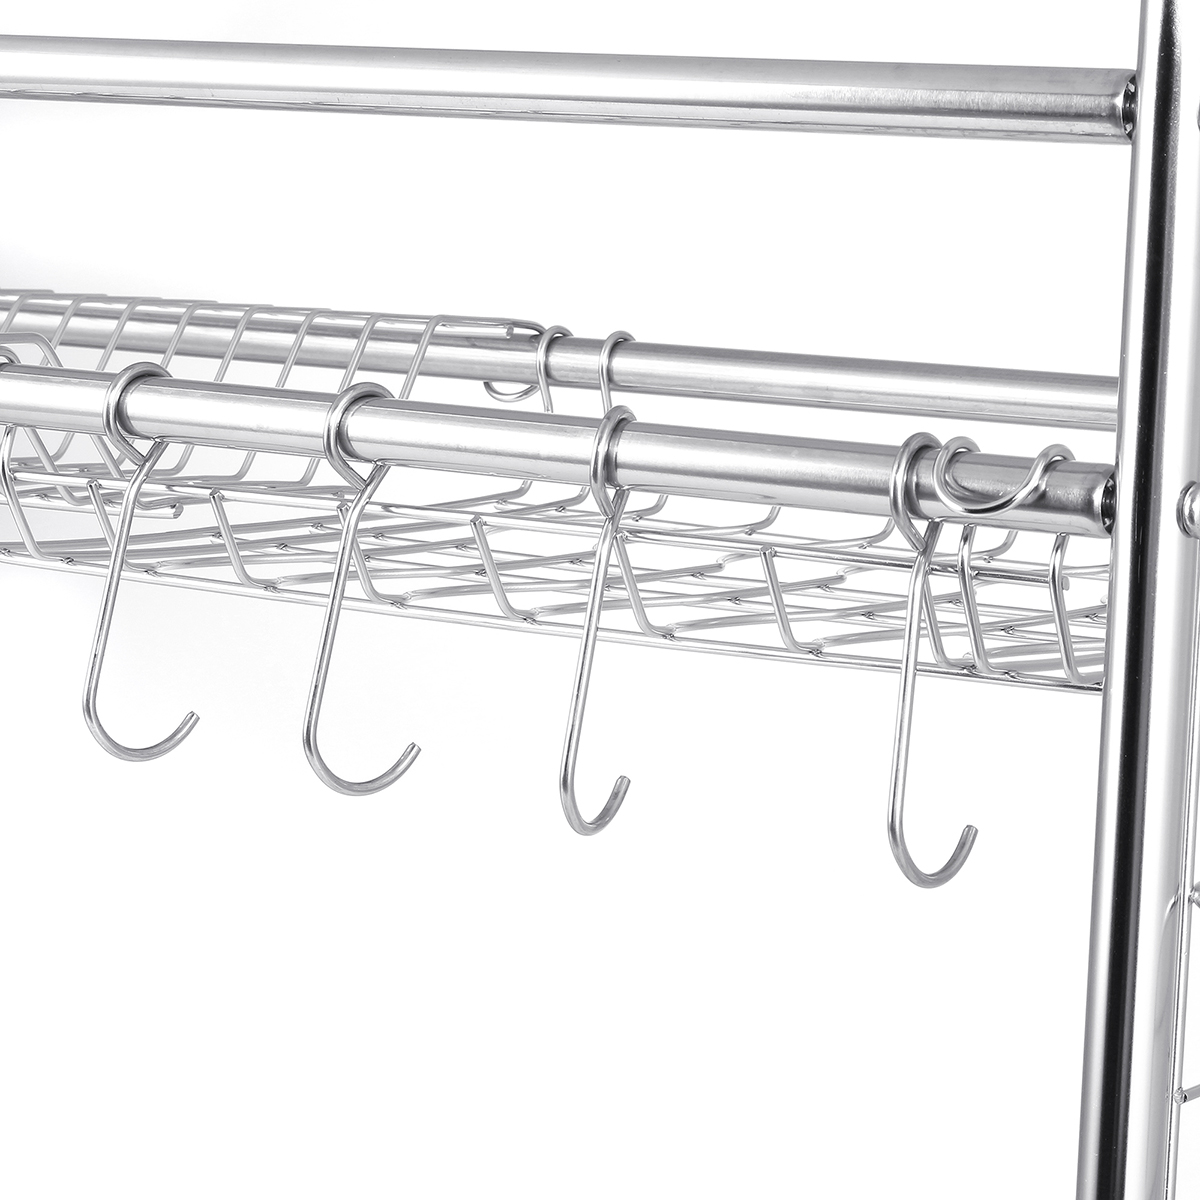 647484cm-Double-Layer-Stainless-Steel-Rack-Shelf-Storage-for-Kitchen-Dishes-Arrangement-1671407-6